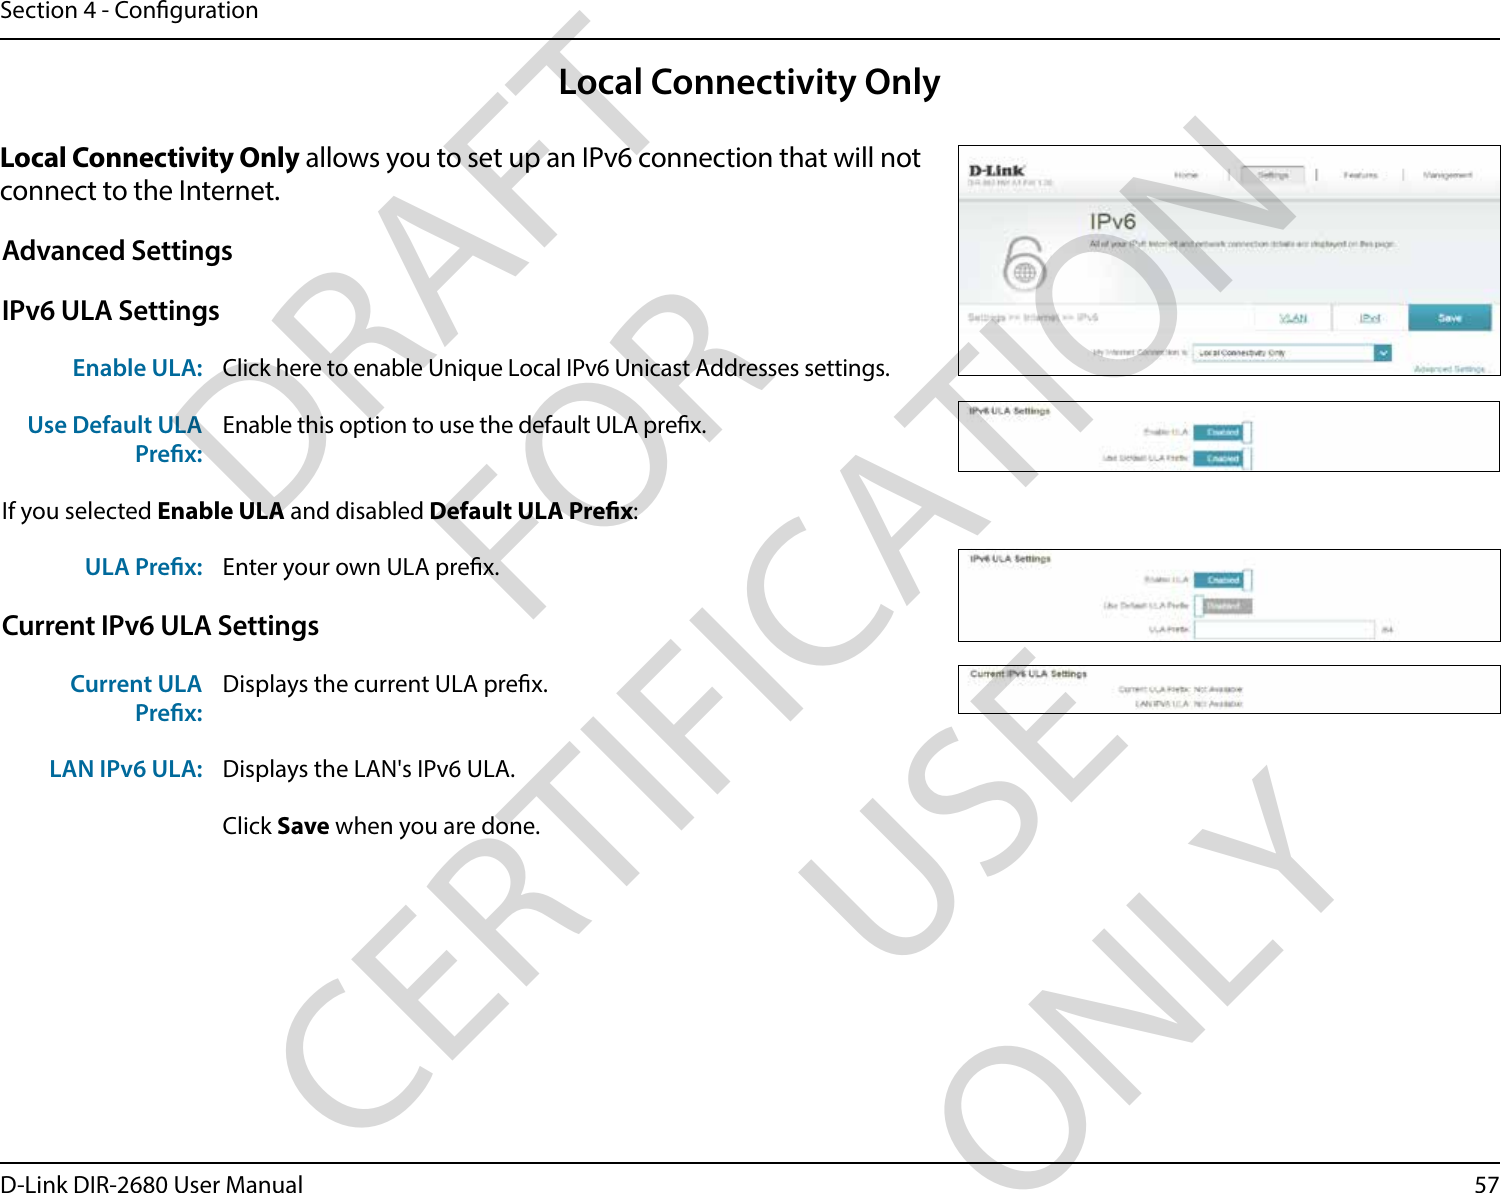 57D-Link DIR-2680 User ManualSection 4 - CongurationLocal Connectivity OnlyLocal Connectivity Only allows you to set up an IPv6 connection that will not connect to the Internet.Advanced SettingsIPv6 ULA SettingsEnable ULA: Click here to enable Unique Local IPv6 Unicast Addresses settings.Use Default ULA Prex:Enable this option to use the default ULA prex.If you selected Enable ULA and disabled Default ULA Prex:ULA Prex: Enter your own ULA prex.Current IPv6 ULA SettingsCurrent ULA Prex:Displays the current ULA prex. LAN IPv6 ULA: Displays the LAN&apos;s IPv6 ULA.Click Save when you are done.DRAFT FOR CERTIFICATION USE ONLY